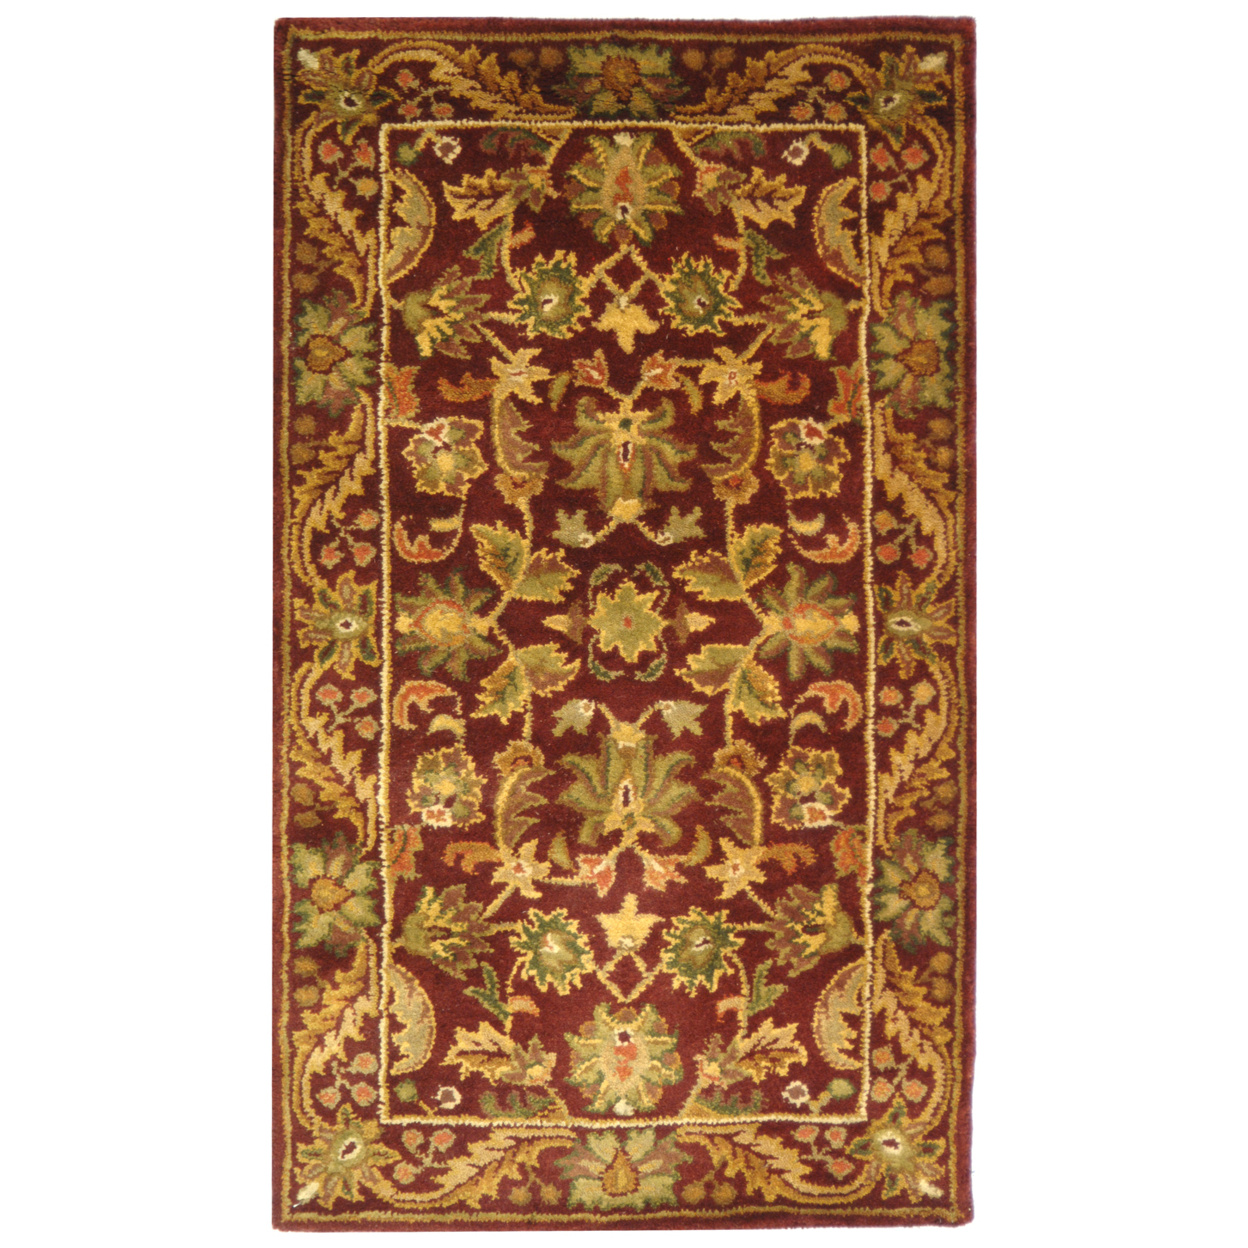 SAFAVIEH Antiquity Carmella Floral Bordered Wool Area Rug, Wine/Gold, 3' x 5' - image 2 of 10